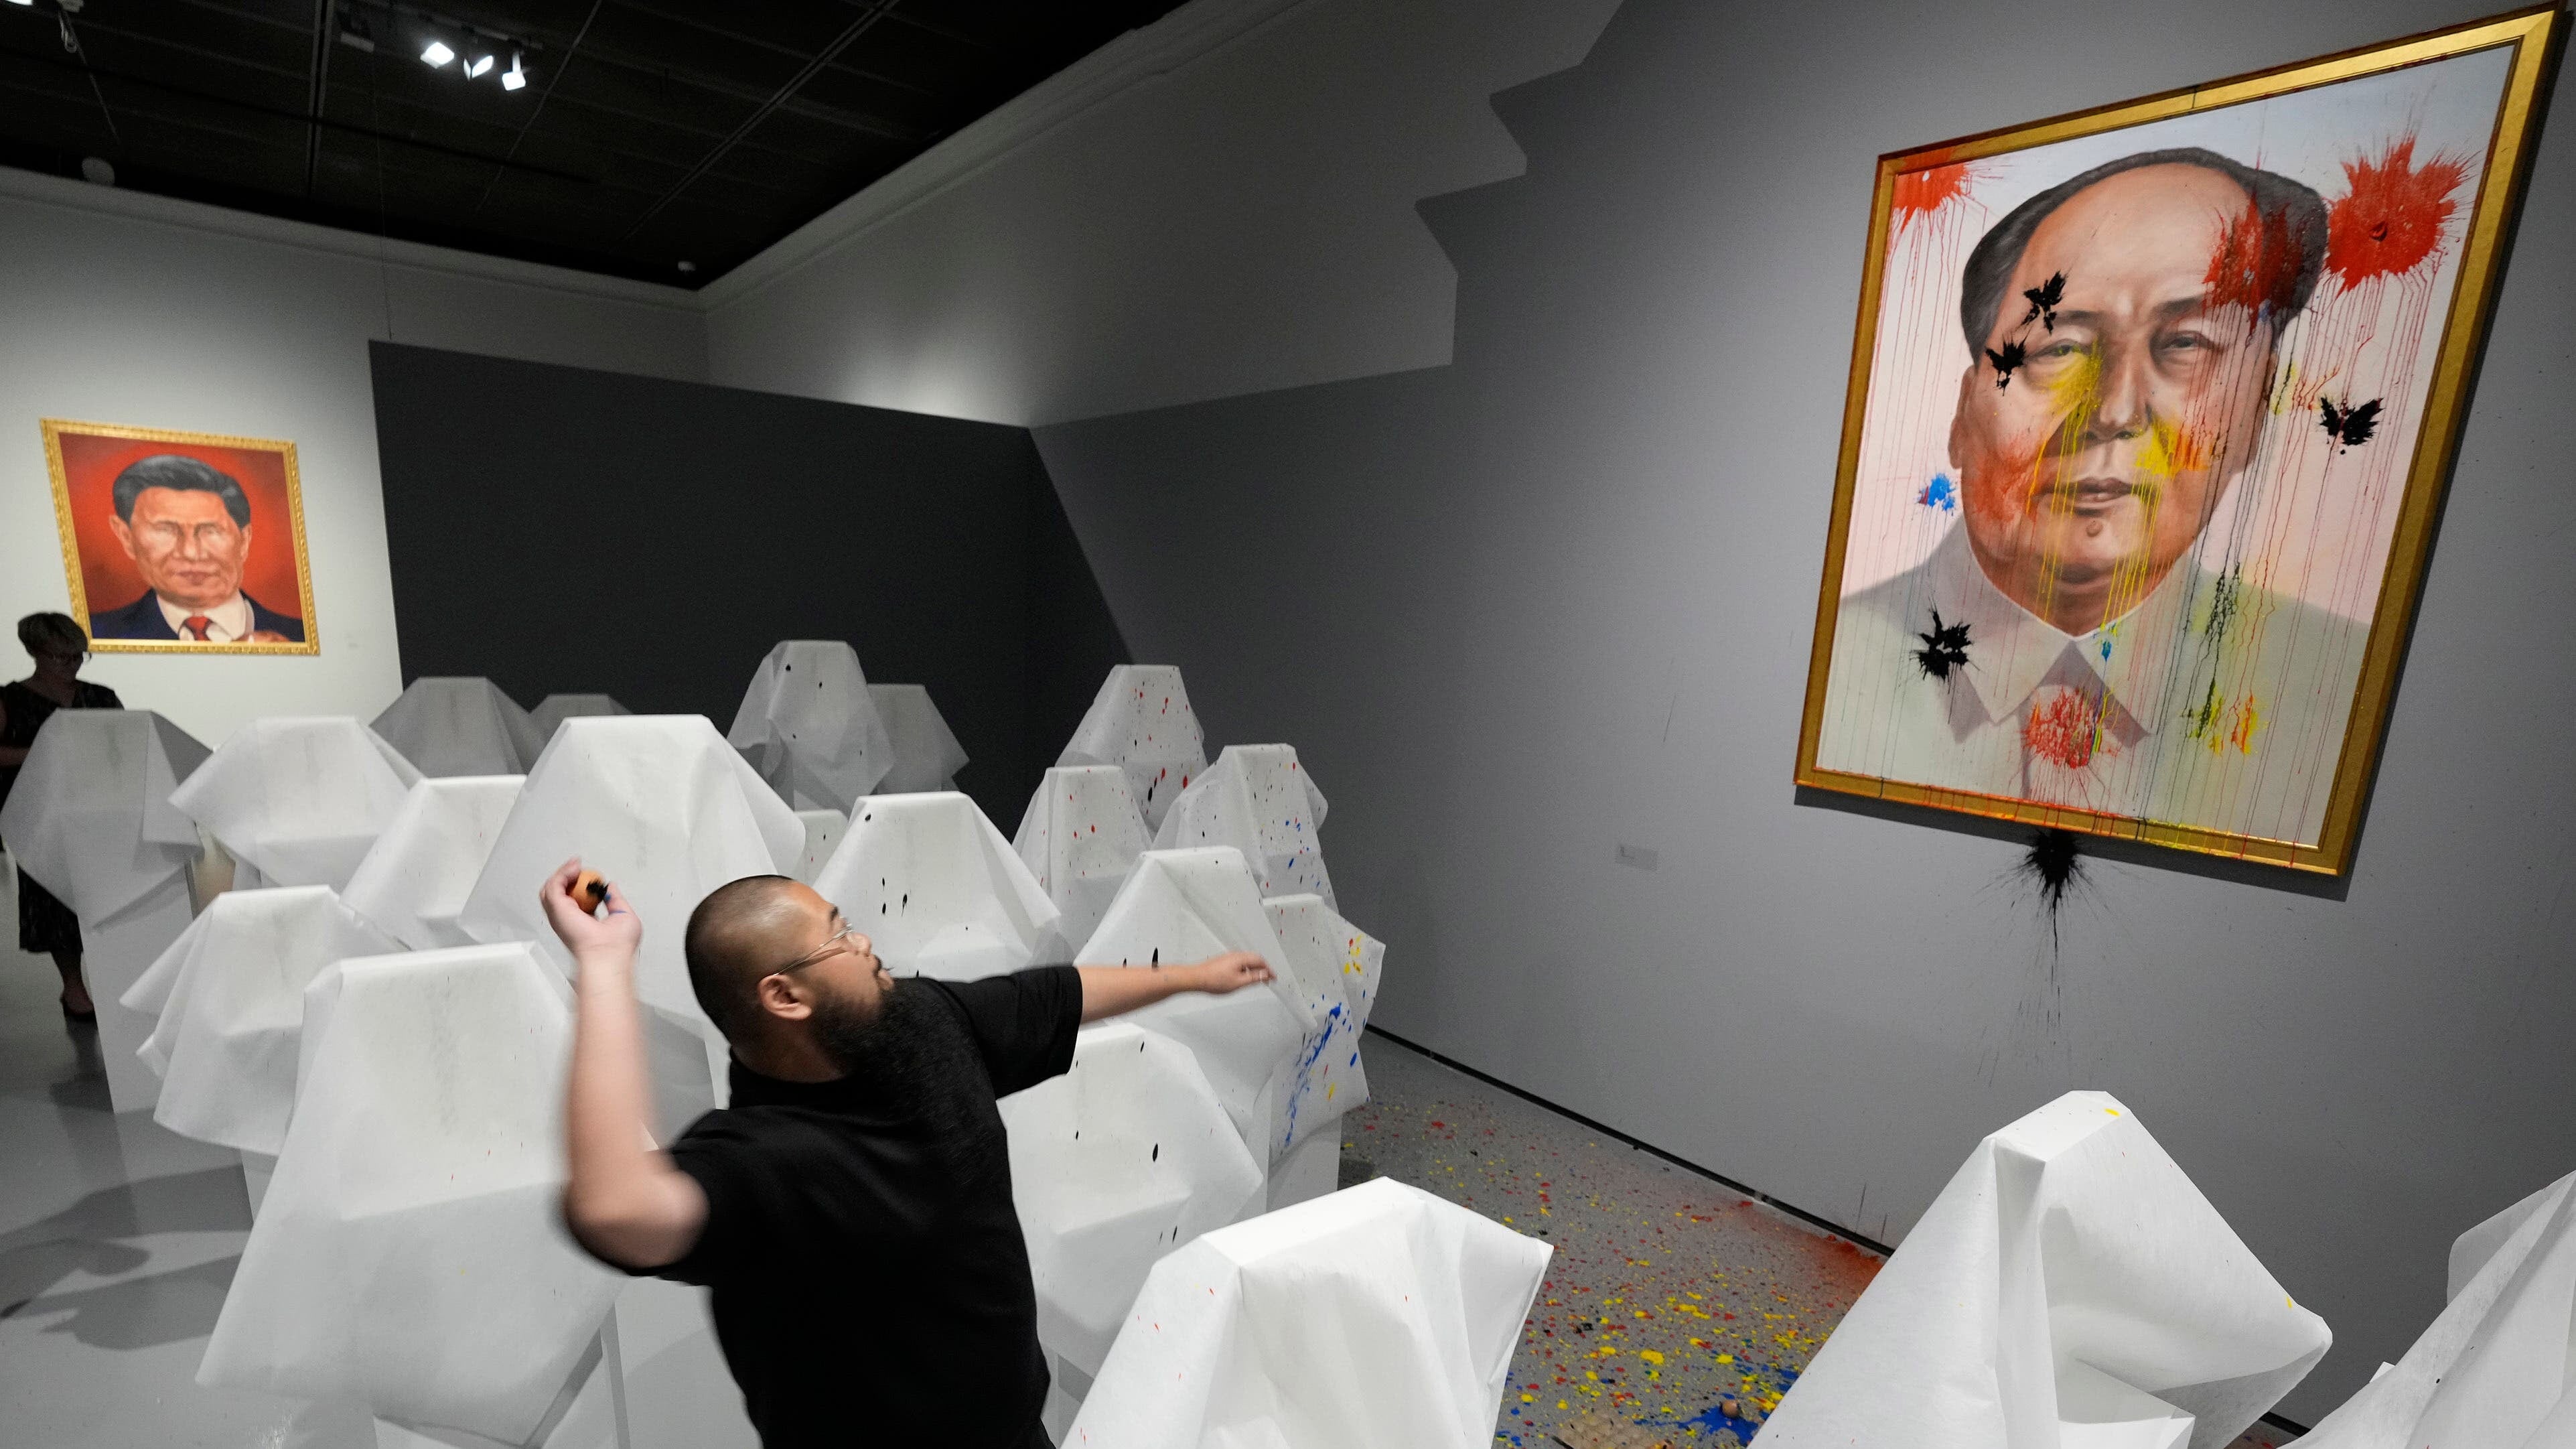 The exhibition by Badiucao is titled Tell China’s Story Well and its promotional image shows Chinese president Xi Jinping eating human flesh.